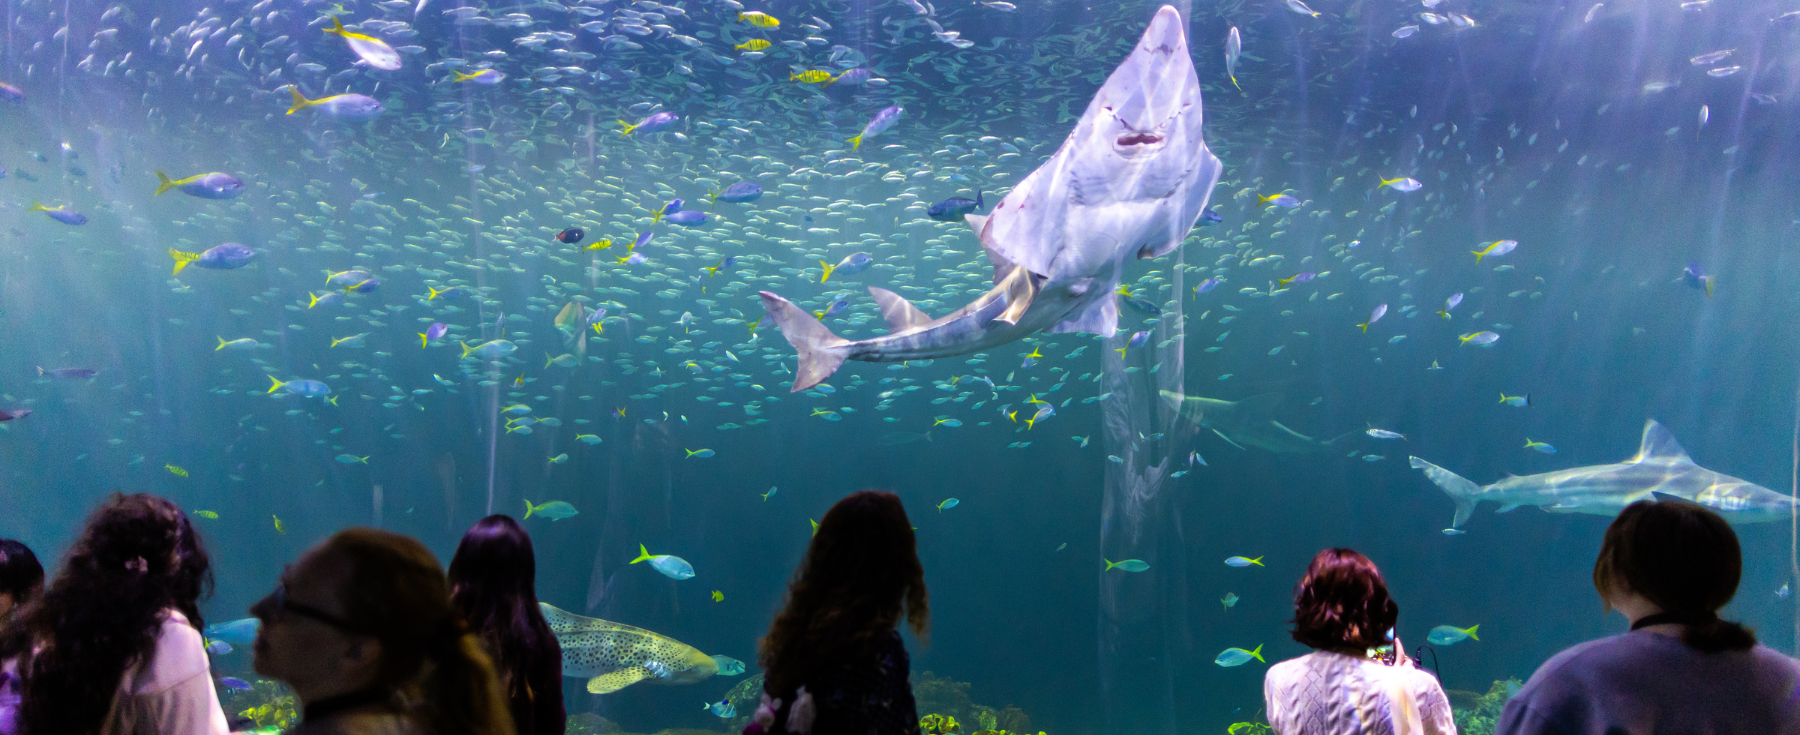 A group of Loyola's TLLSC students look at an aquarium in awe.